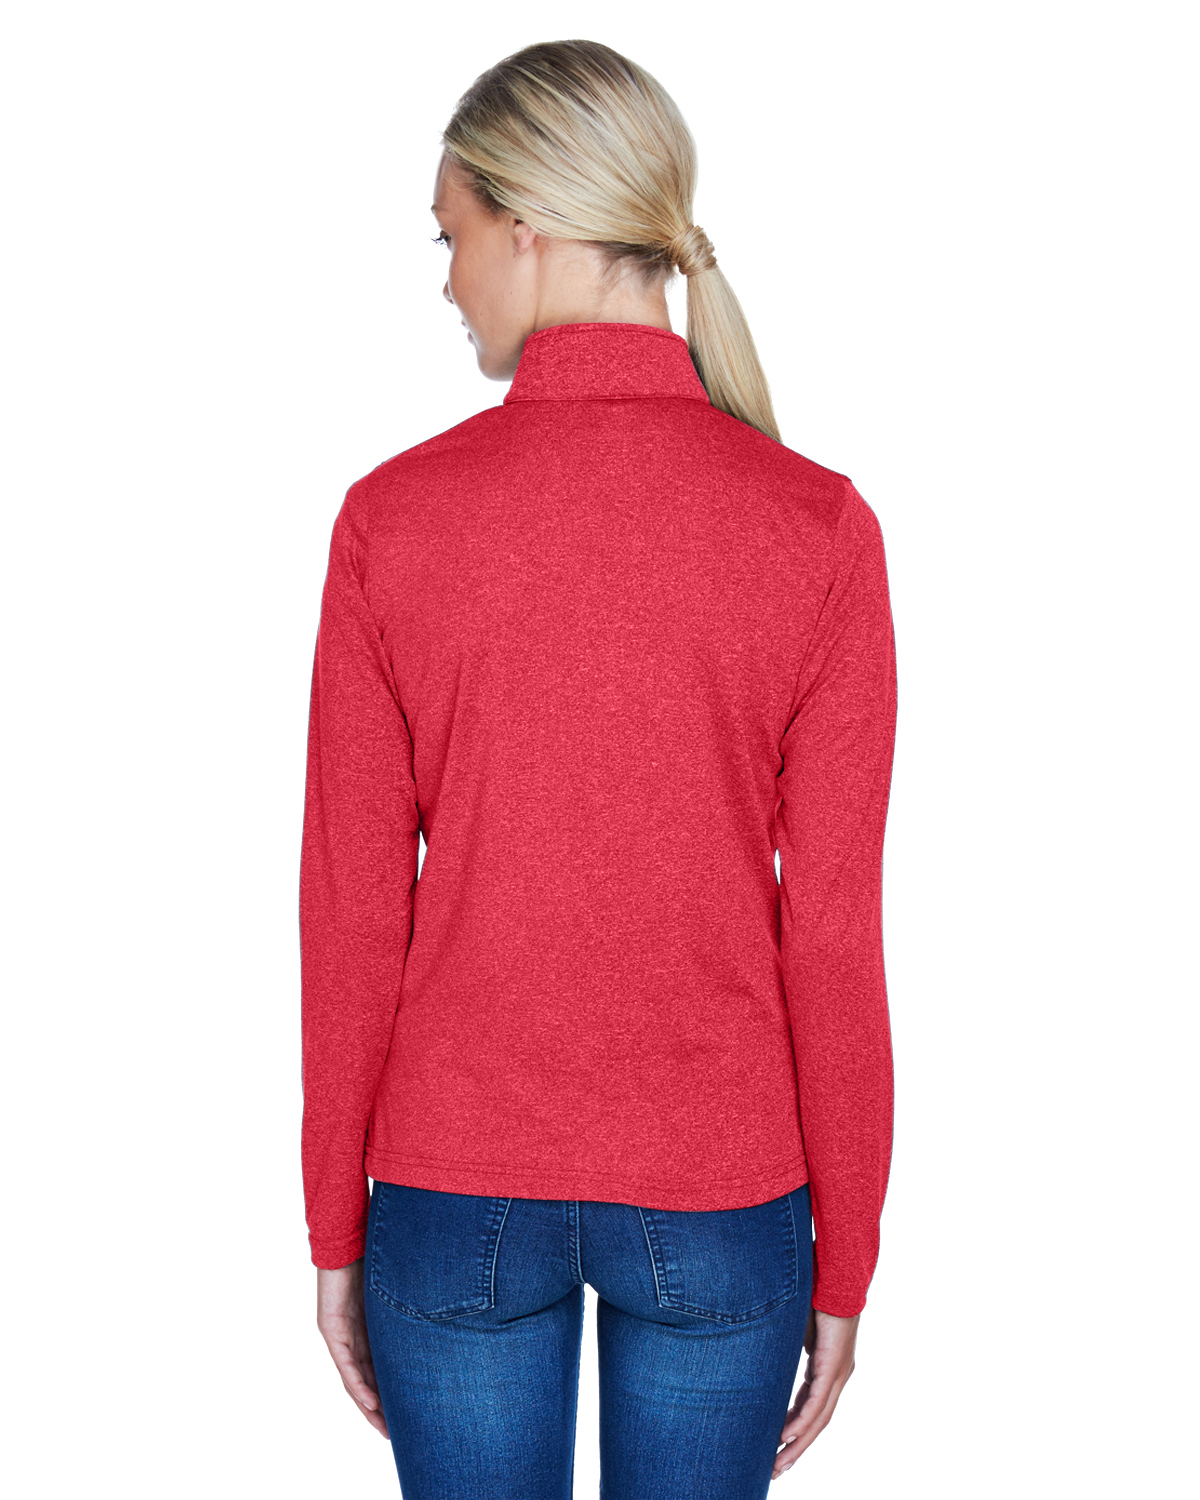 3X-Large UltraClubs Womens ULTC-8618W-UltraClub Ladies Cool & Dry Heathered P red 